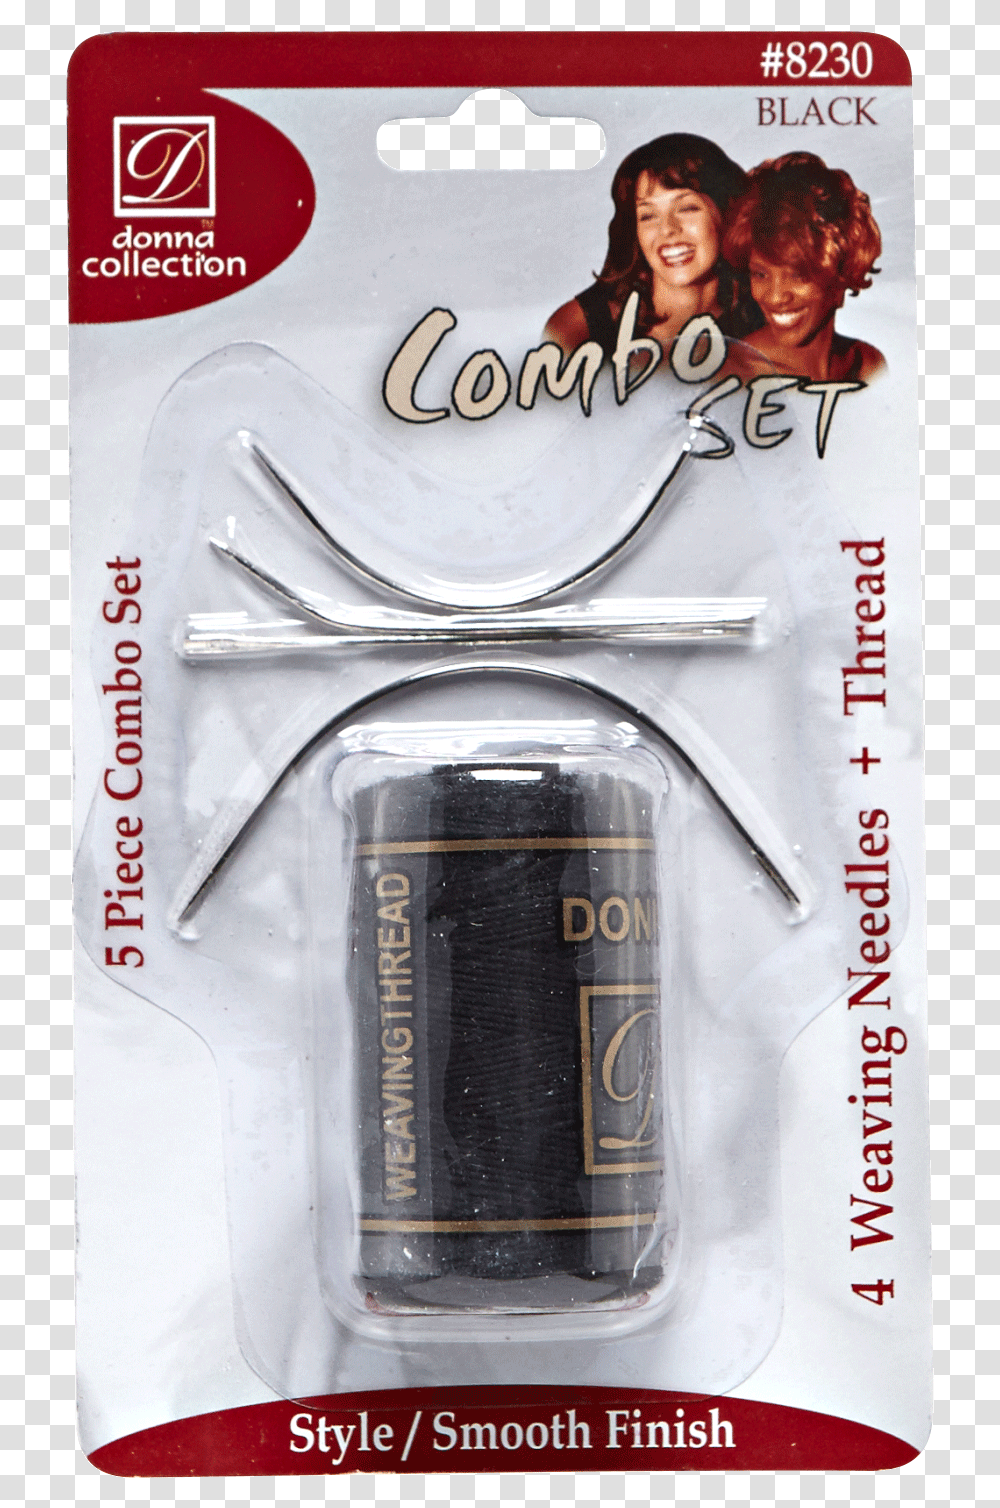 Donna Collection Black Weaving Thread Amp Needle, Person, Label, Bottle Transparent Png